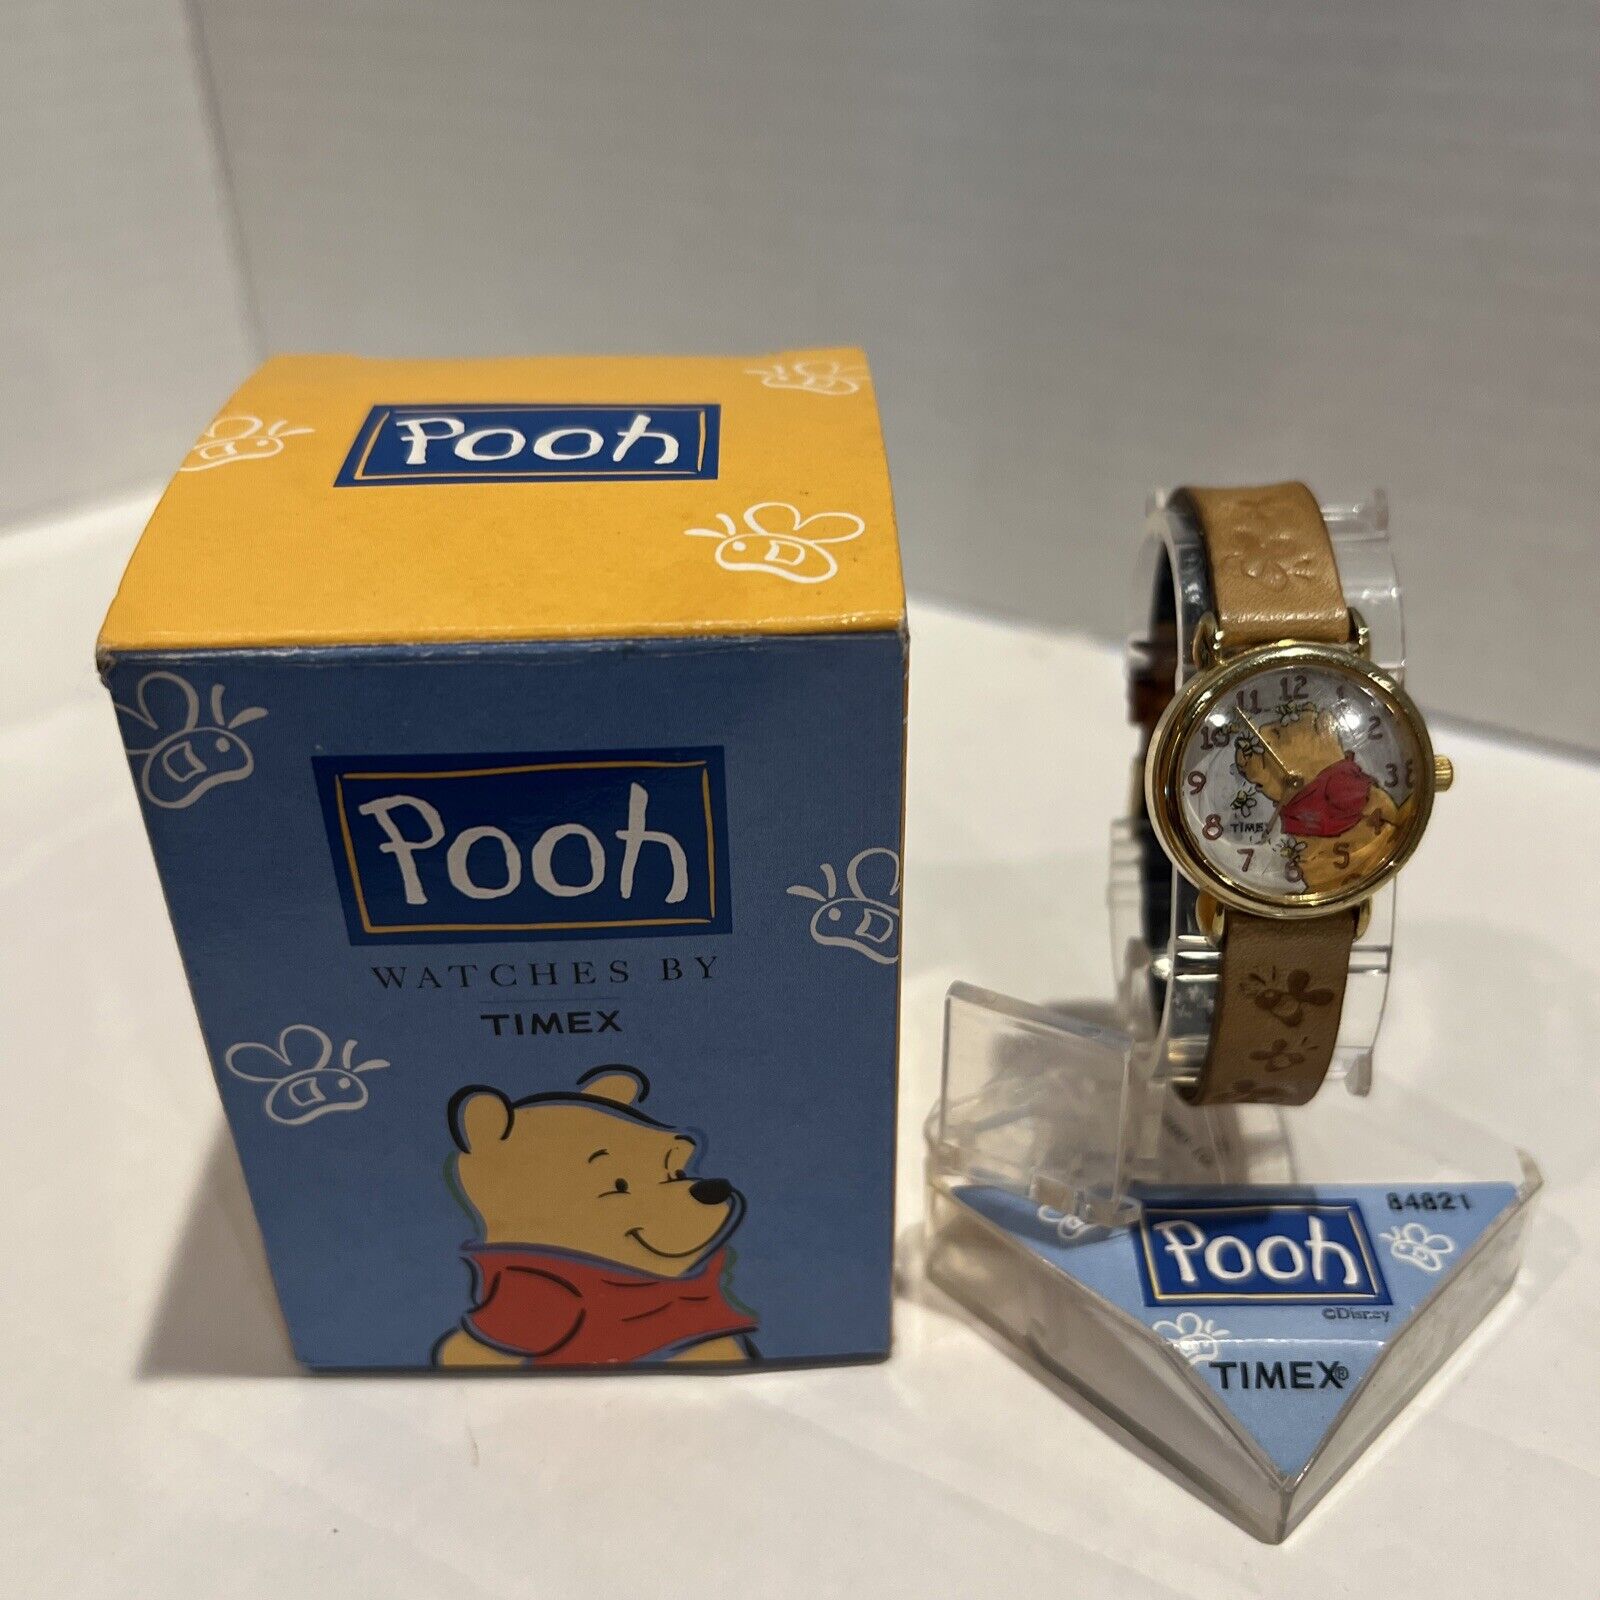 Vintage Timex Winnie the Pooh wrist watch With Leather Band #84821